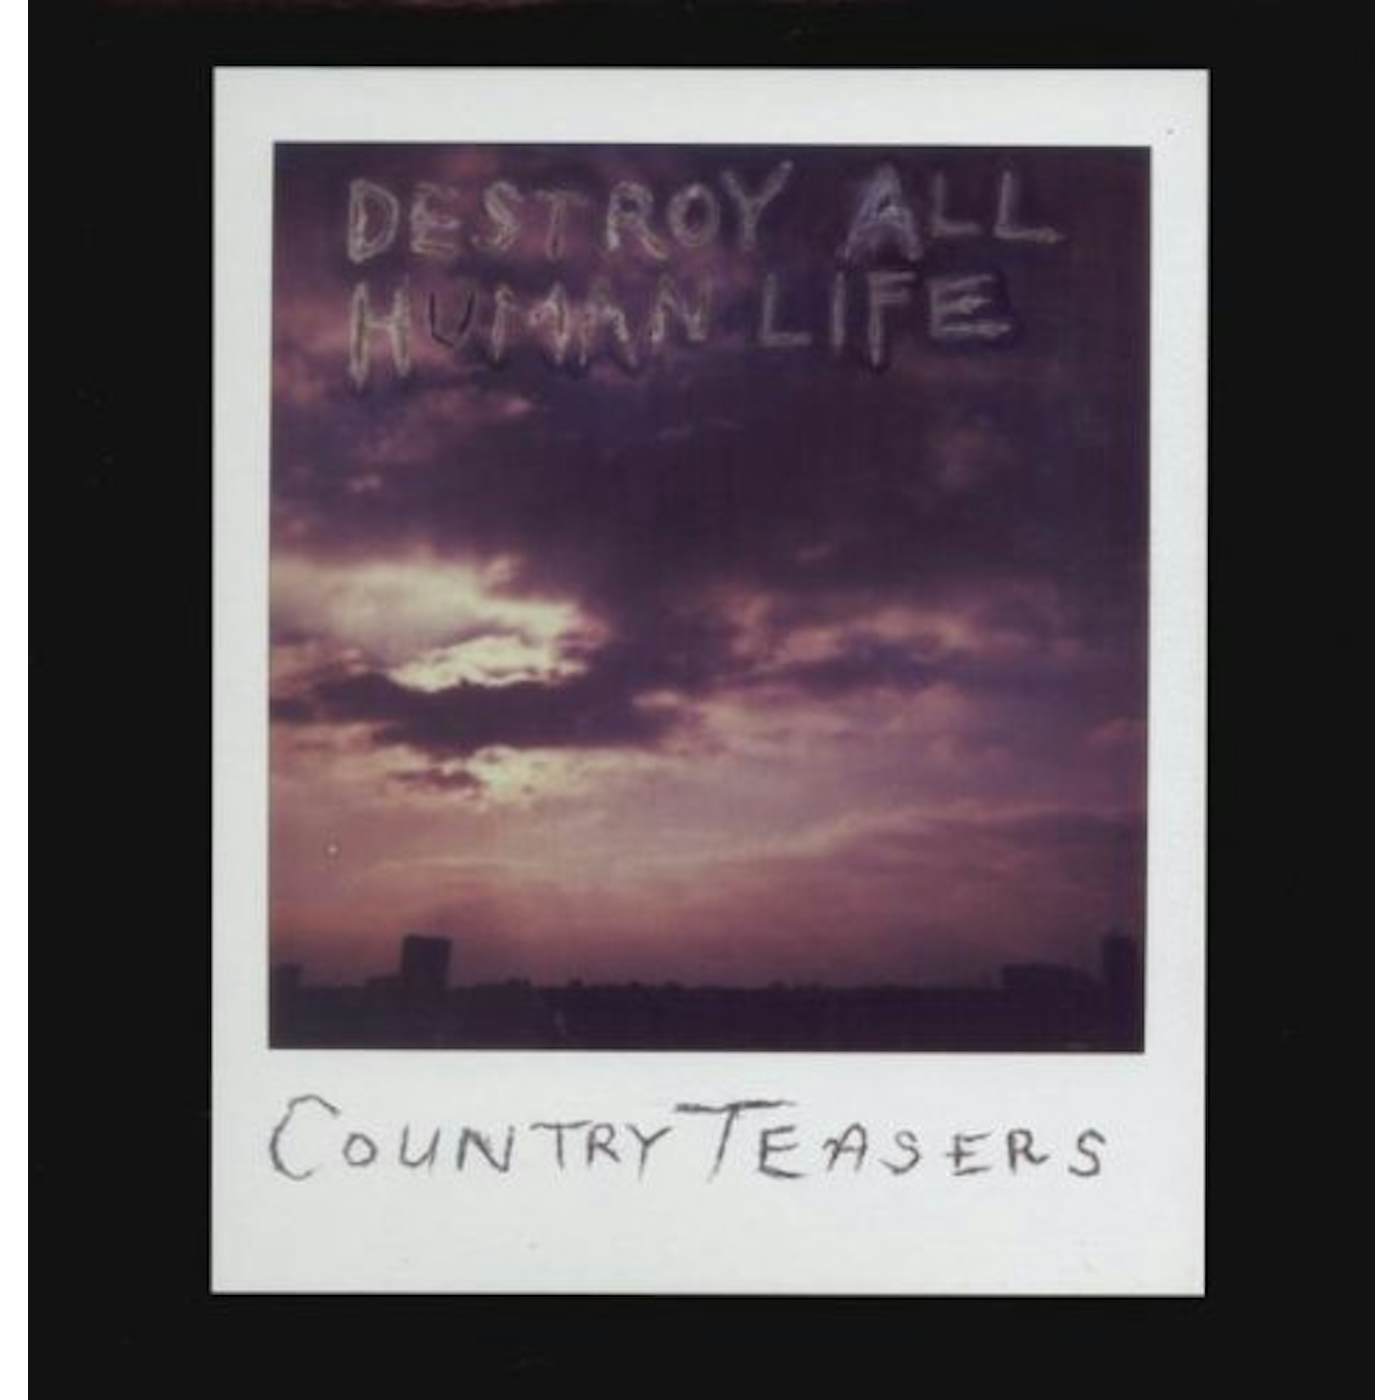 Country Teasers Destroy All Human Life Vinyl Record